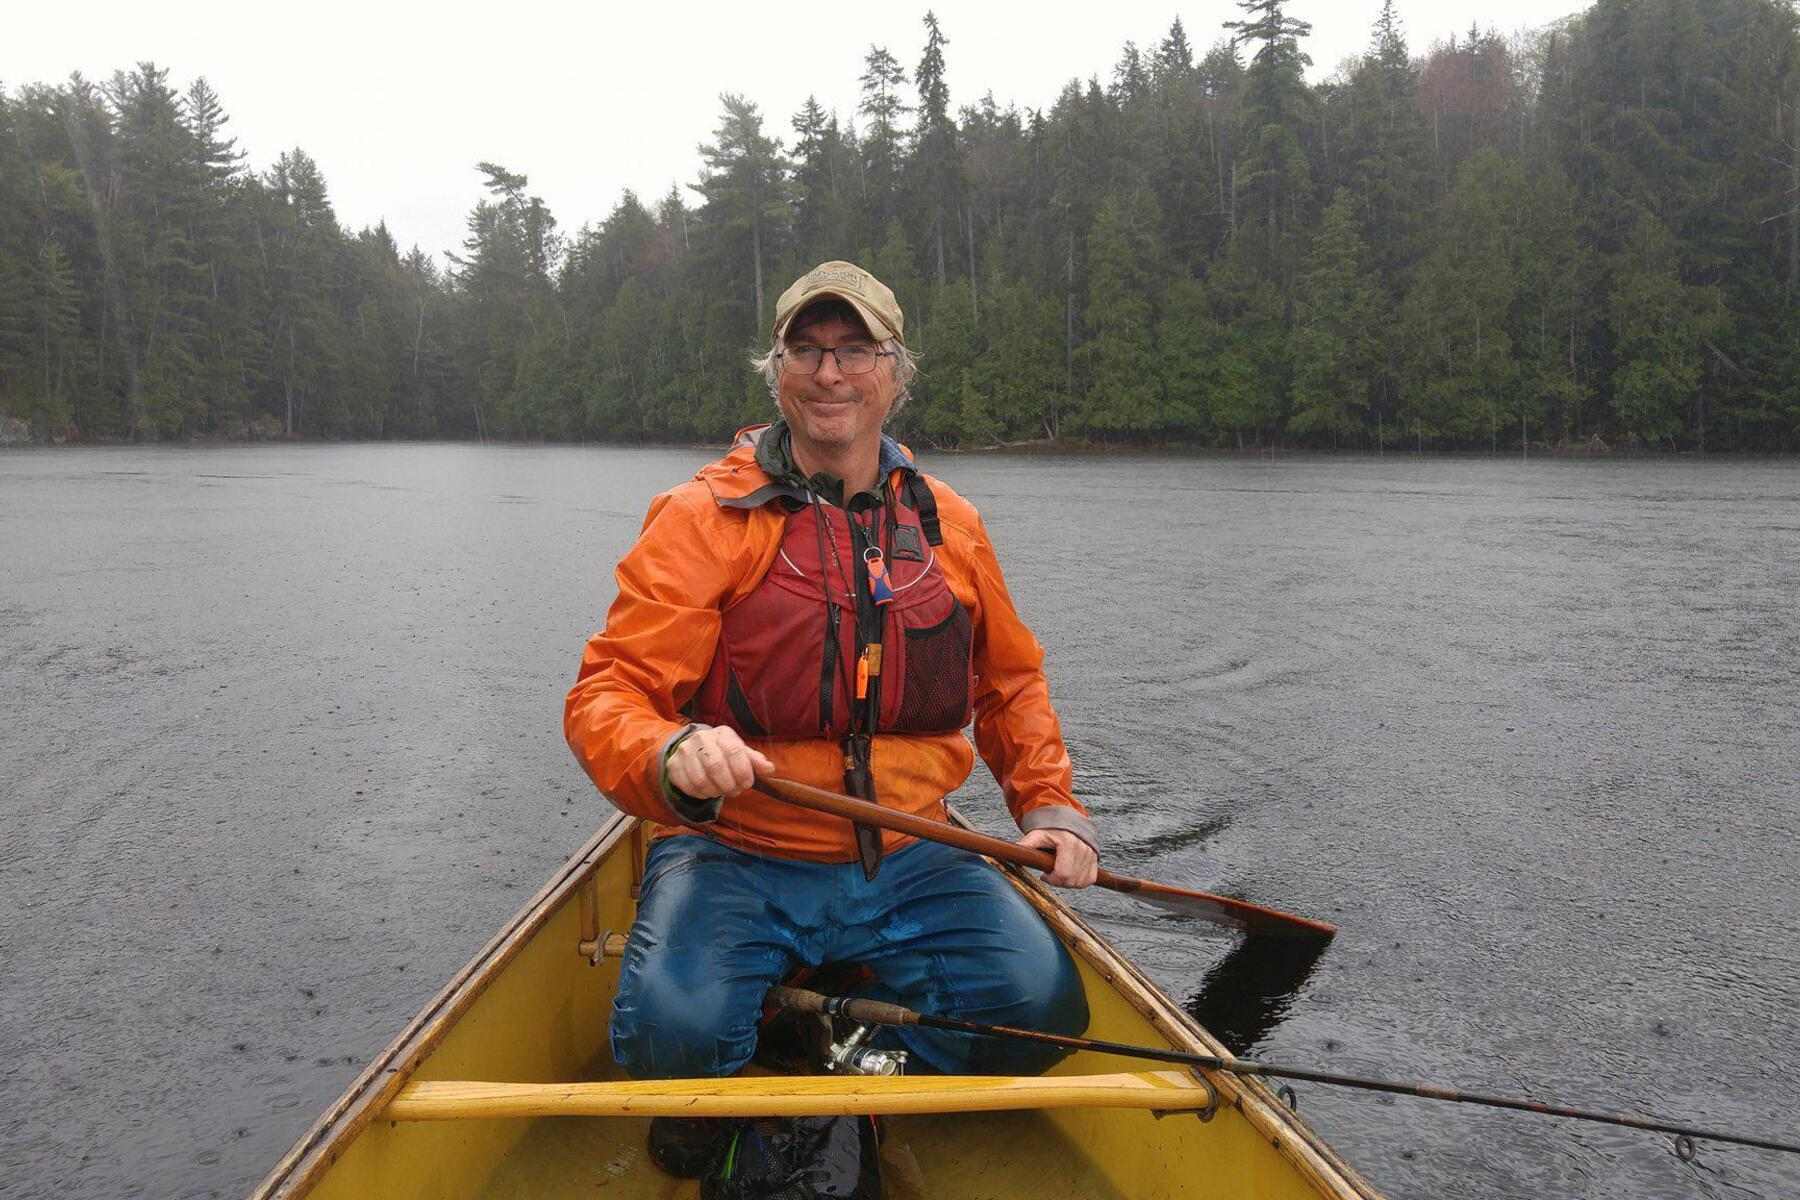 Kevin Callan smiling as he paddles a canoe in a remote lake on a rainy day.